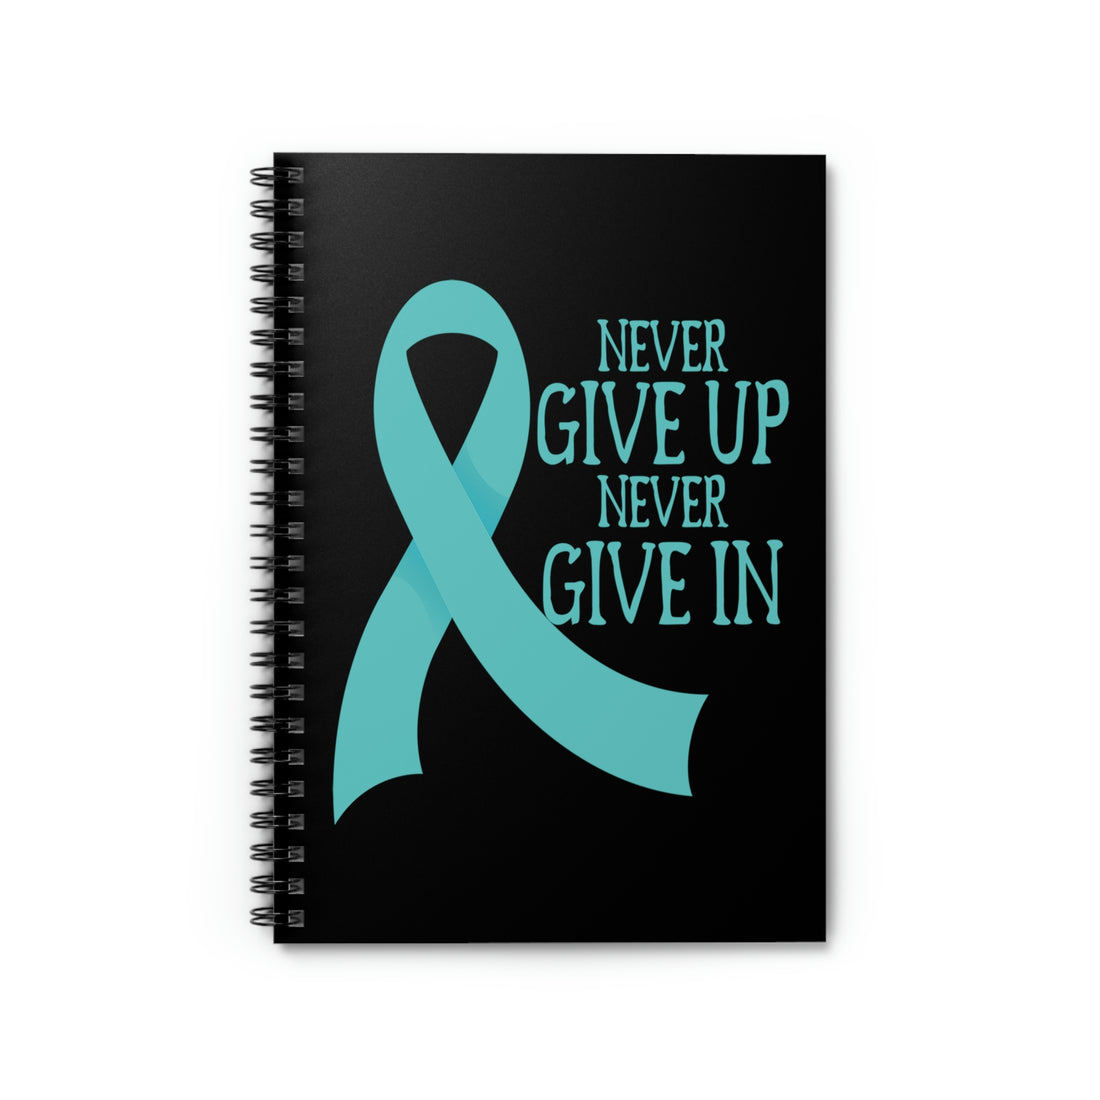 Never Give Up Never Give In - Spiral Notebook - Ruled Line